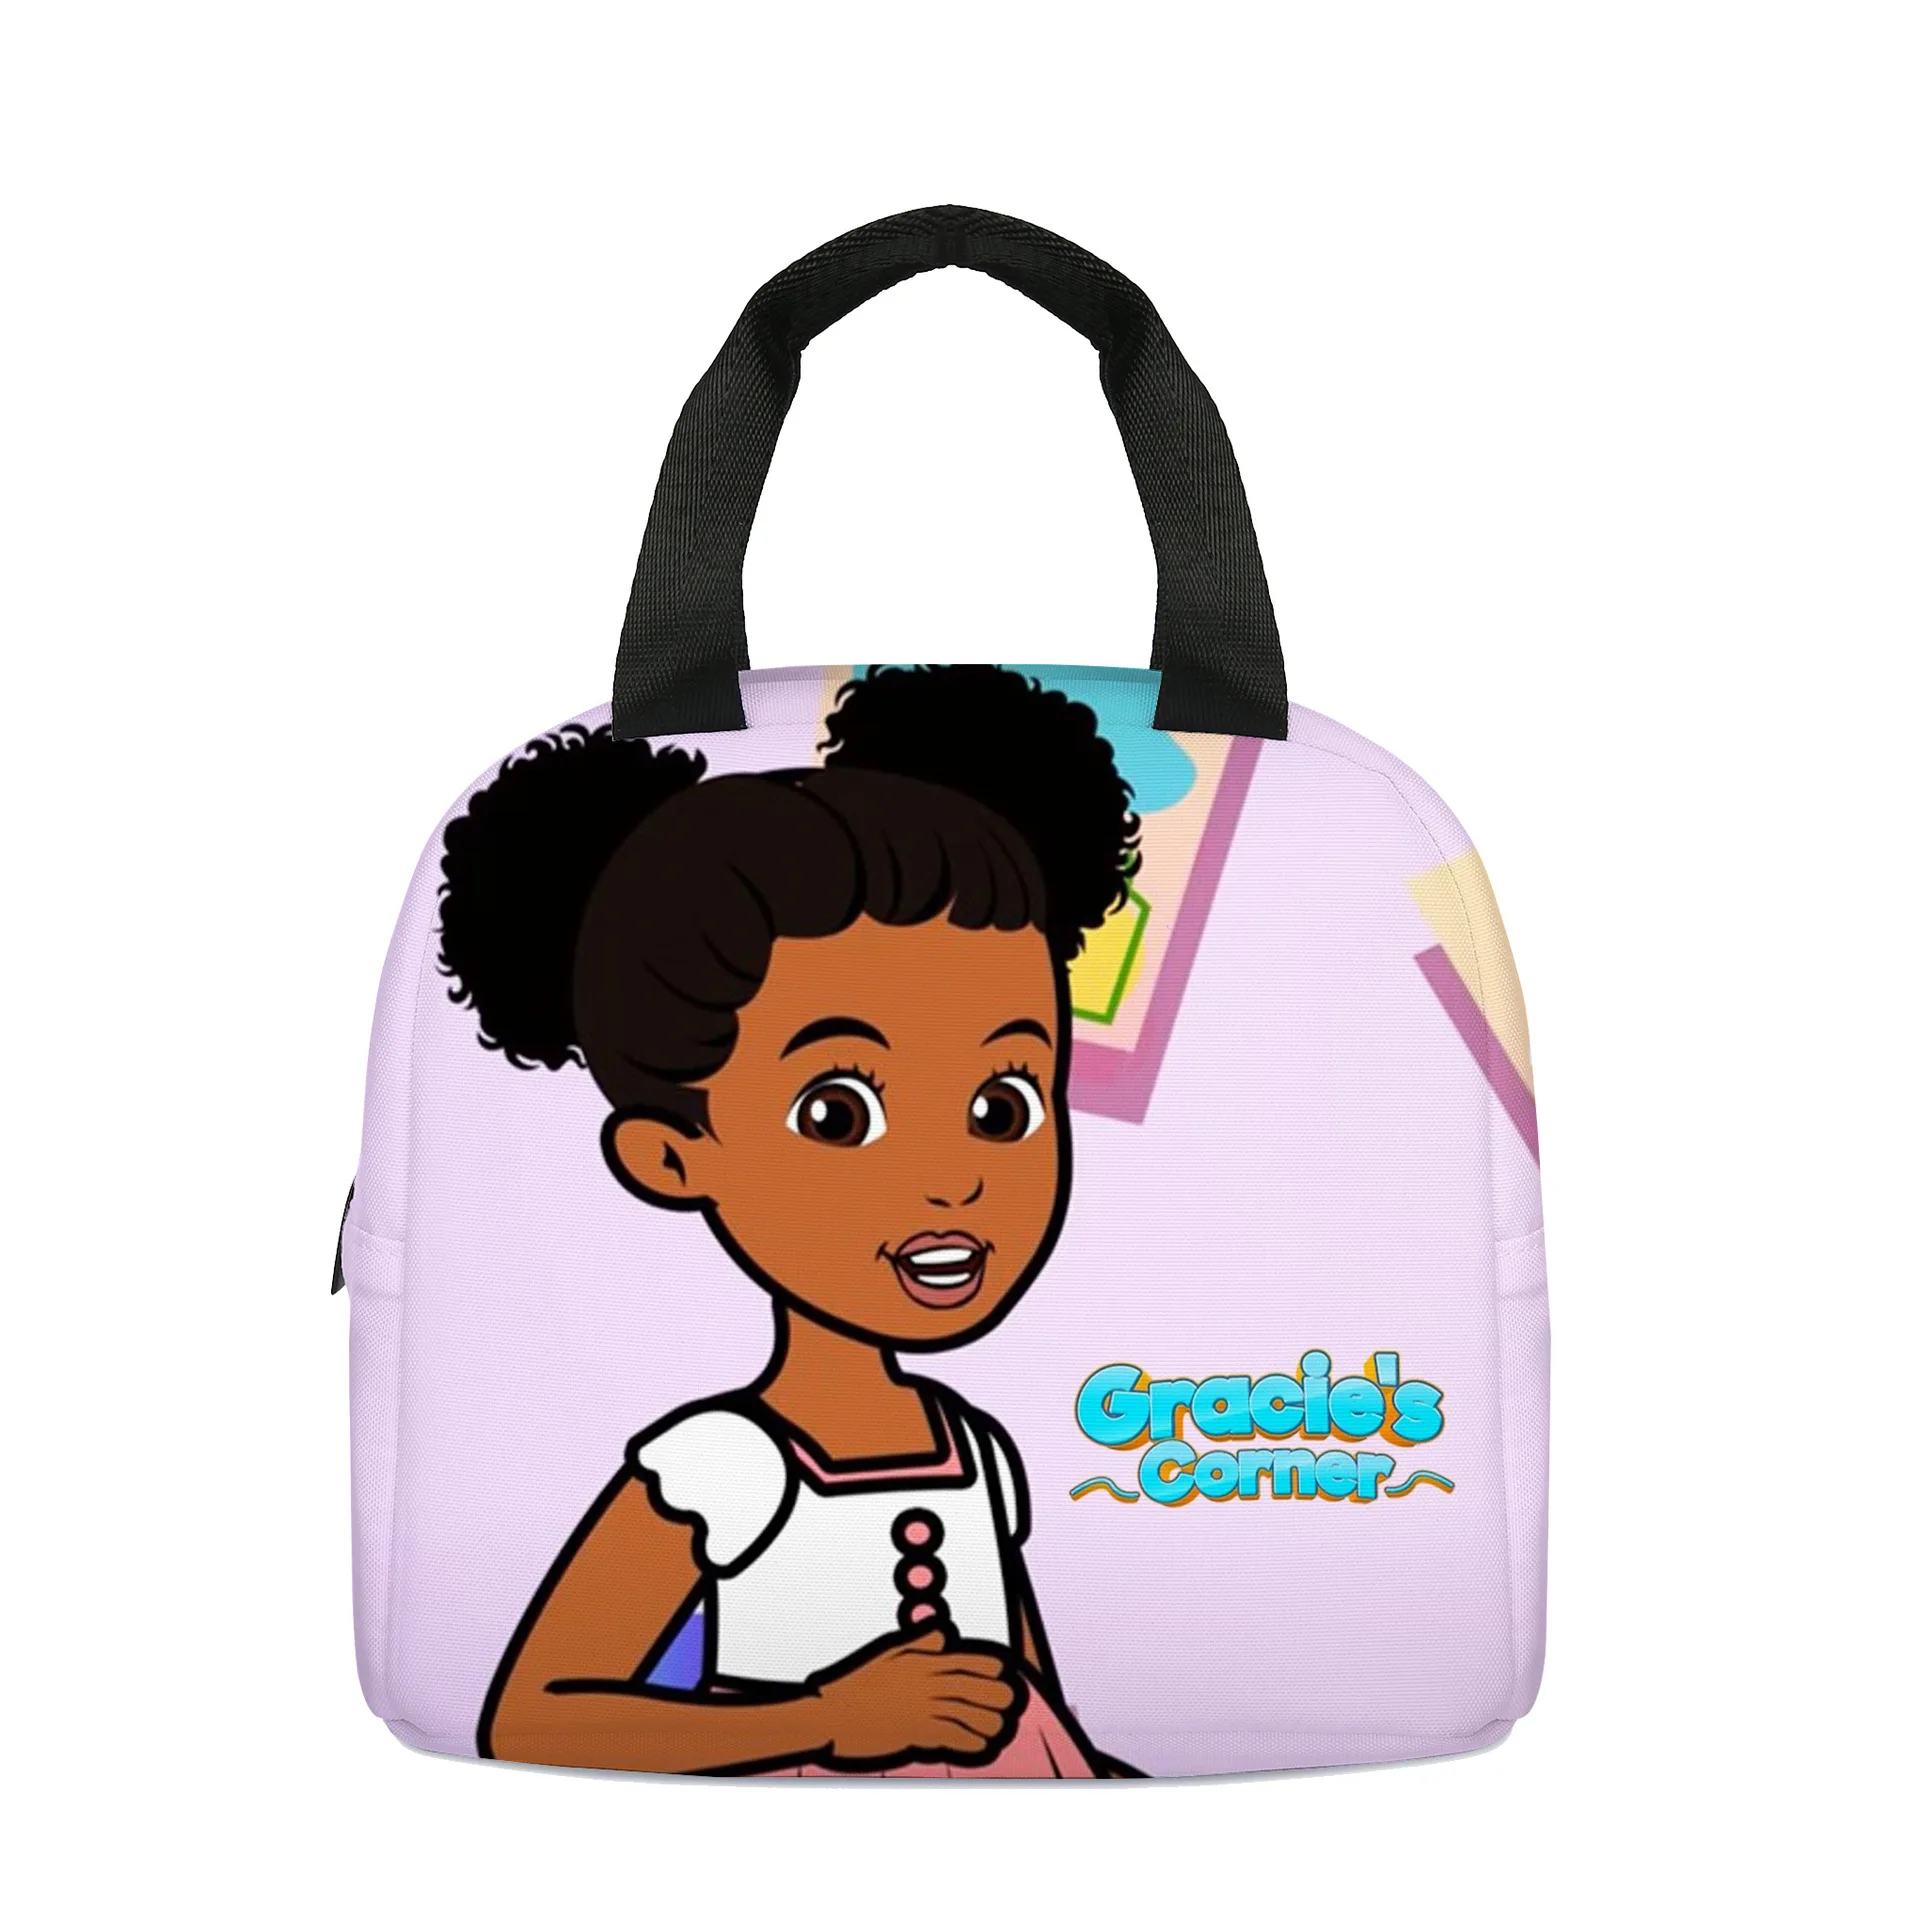 

Gracies Corner Series Around Children's Ice Bags Primary and Secondary School Students Cartoon Anime Lunch Bag Picnic Bag